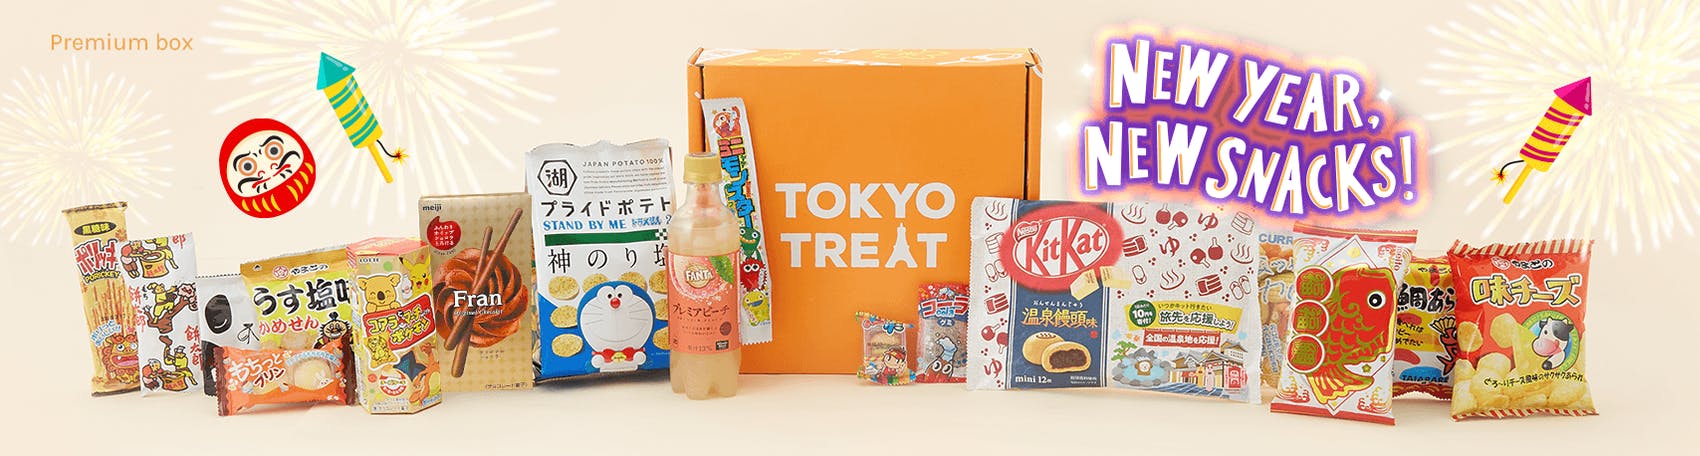 New Year Japanese Snack Boxes - TokyoTreat review